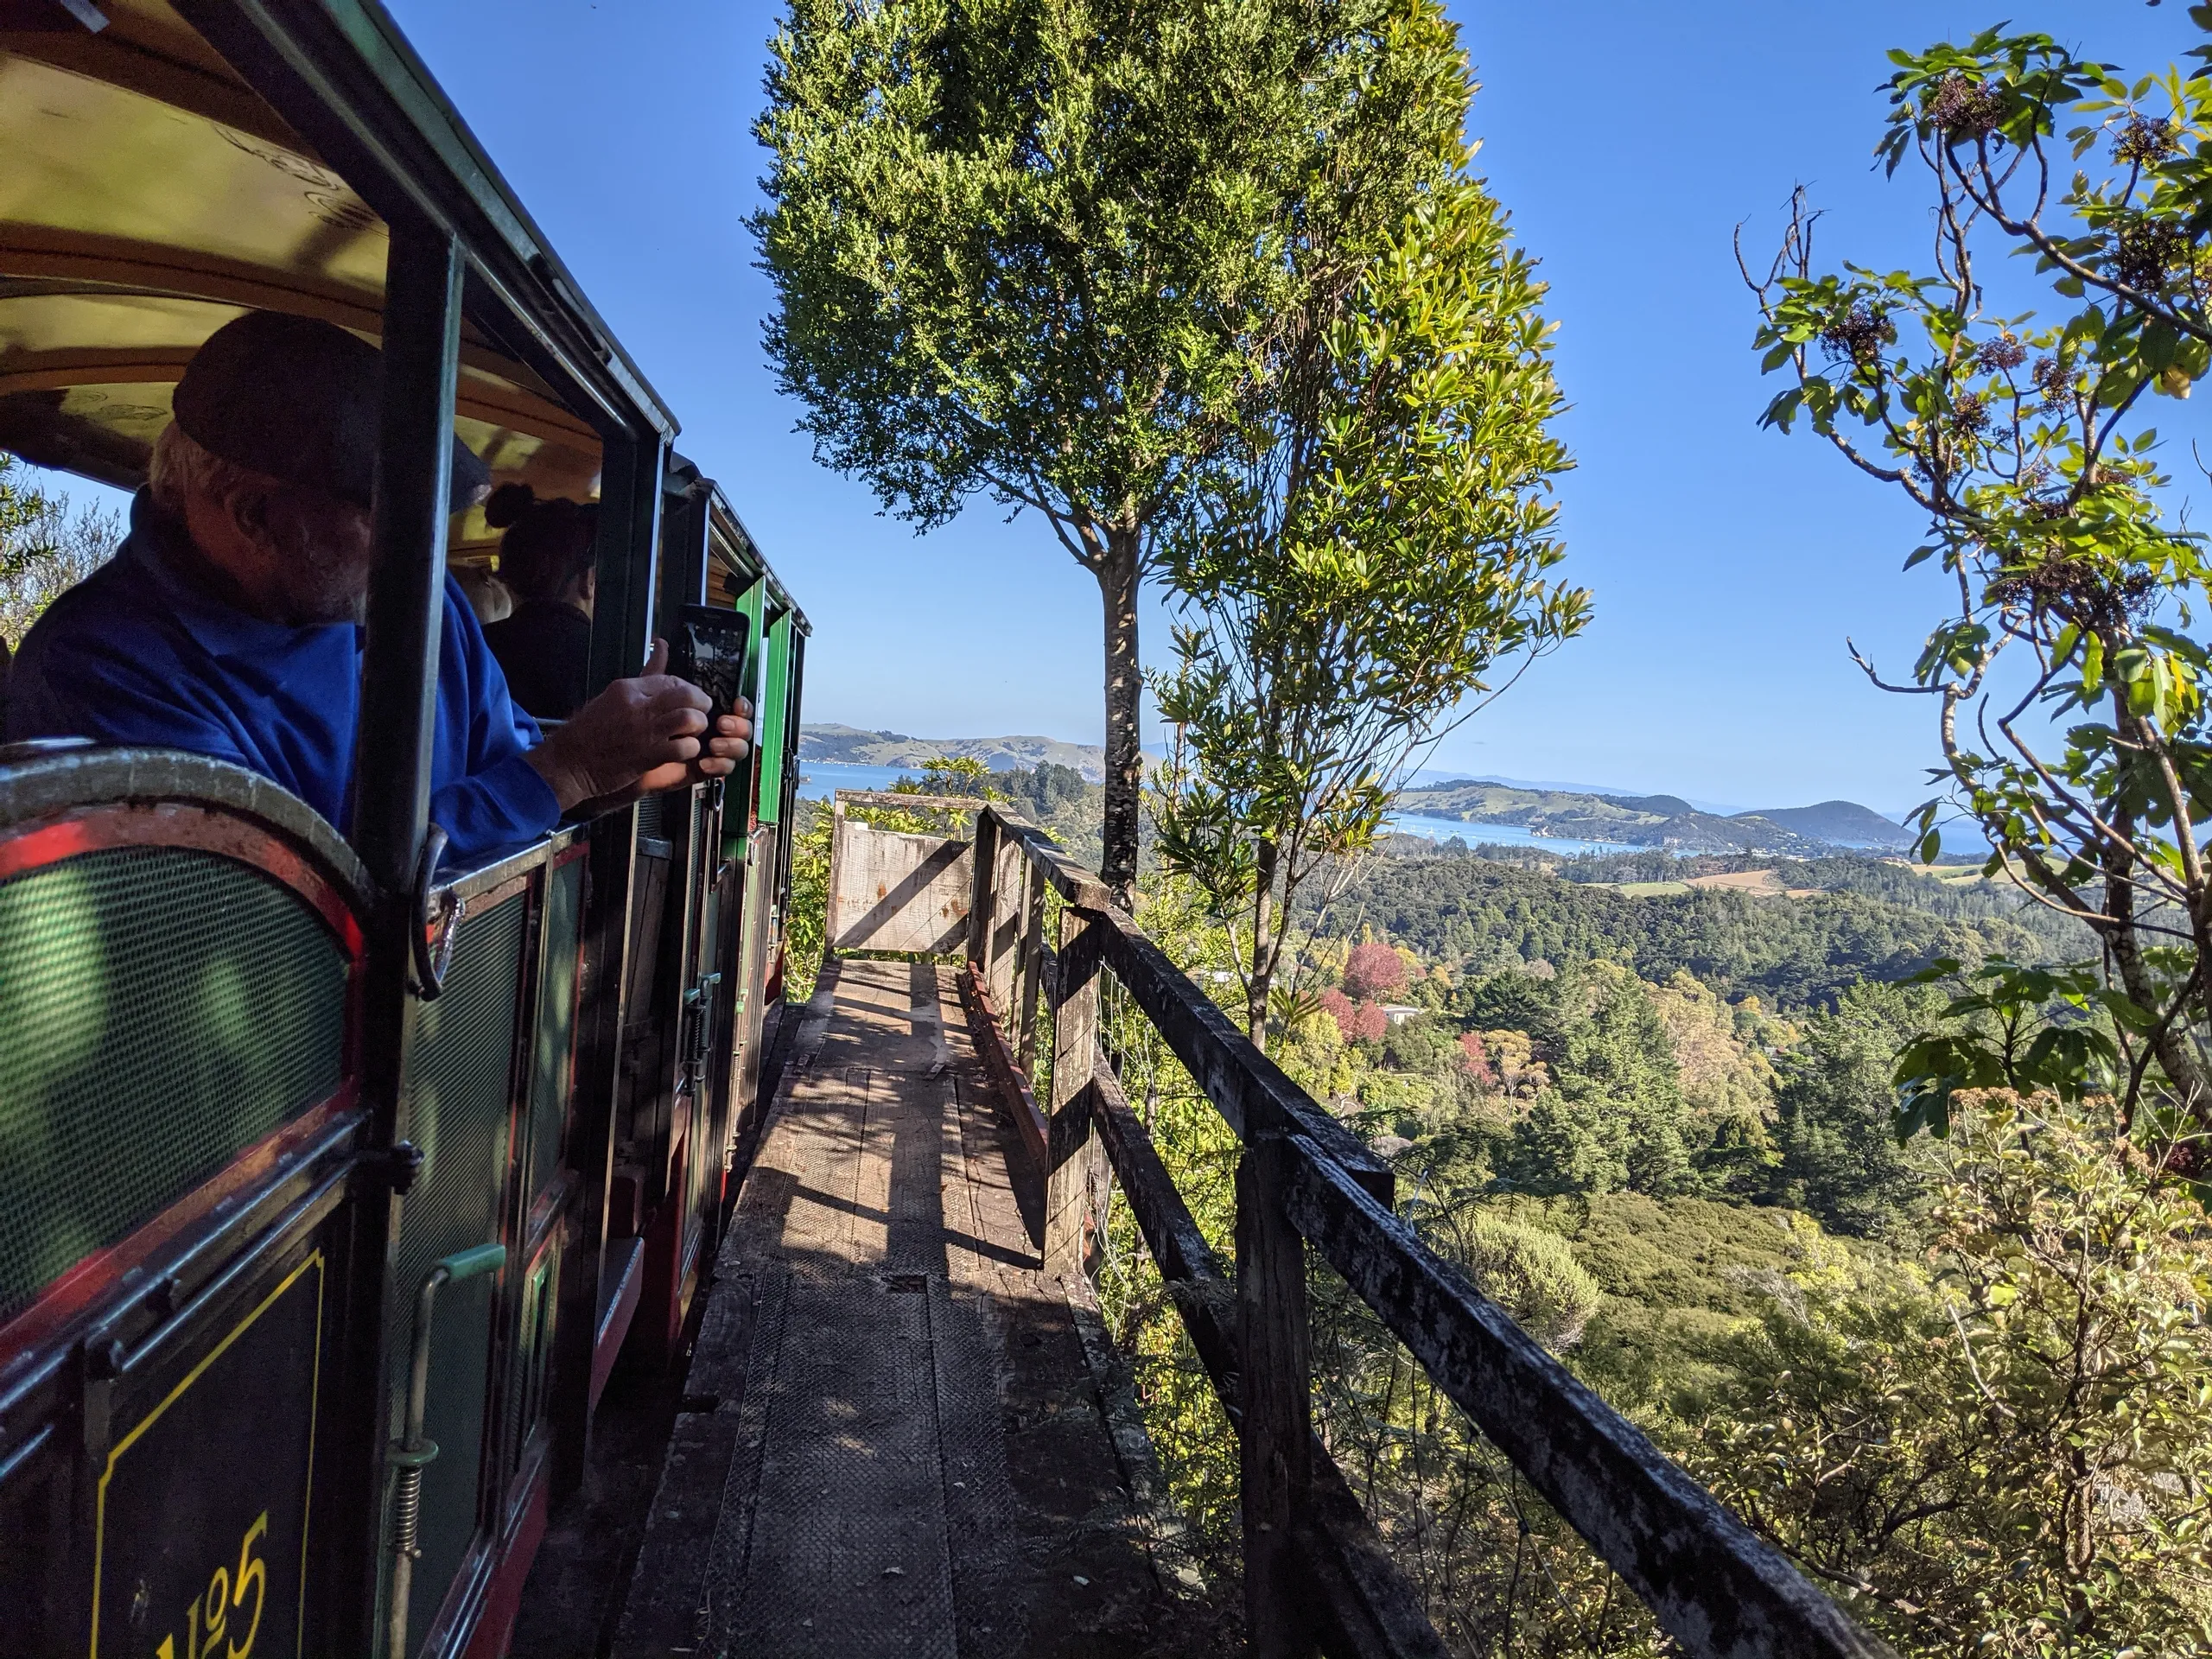 Driving Creek Railway provided great views and offbeat entertainment